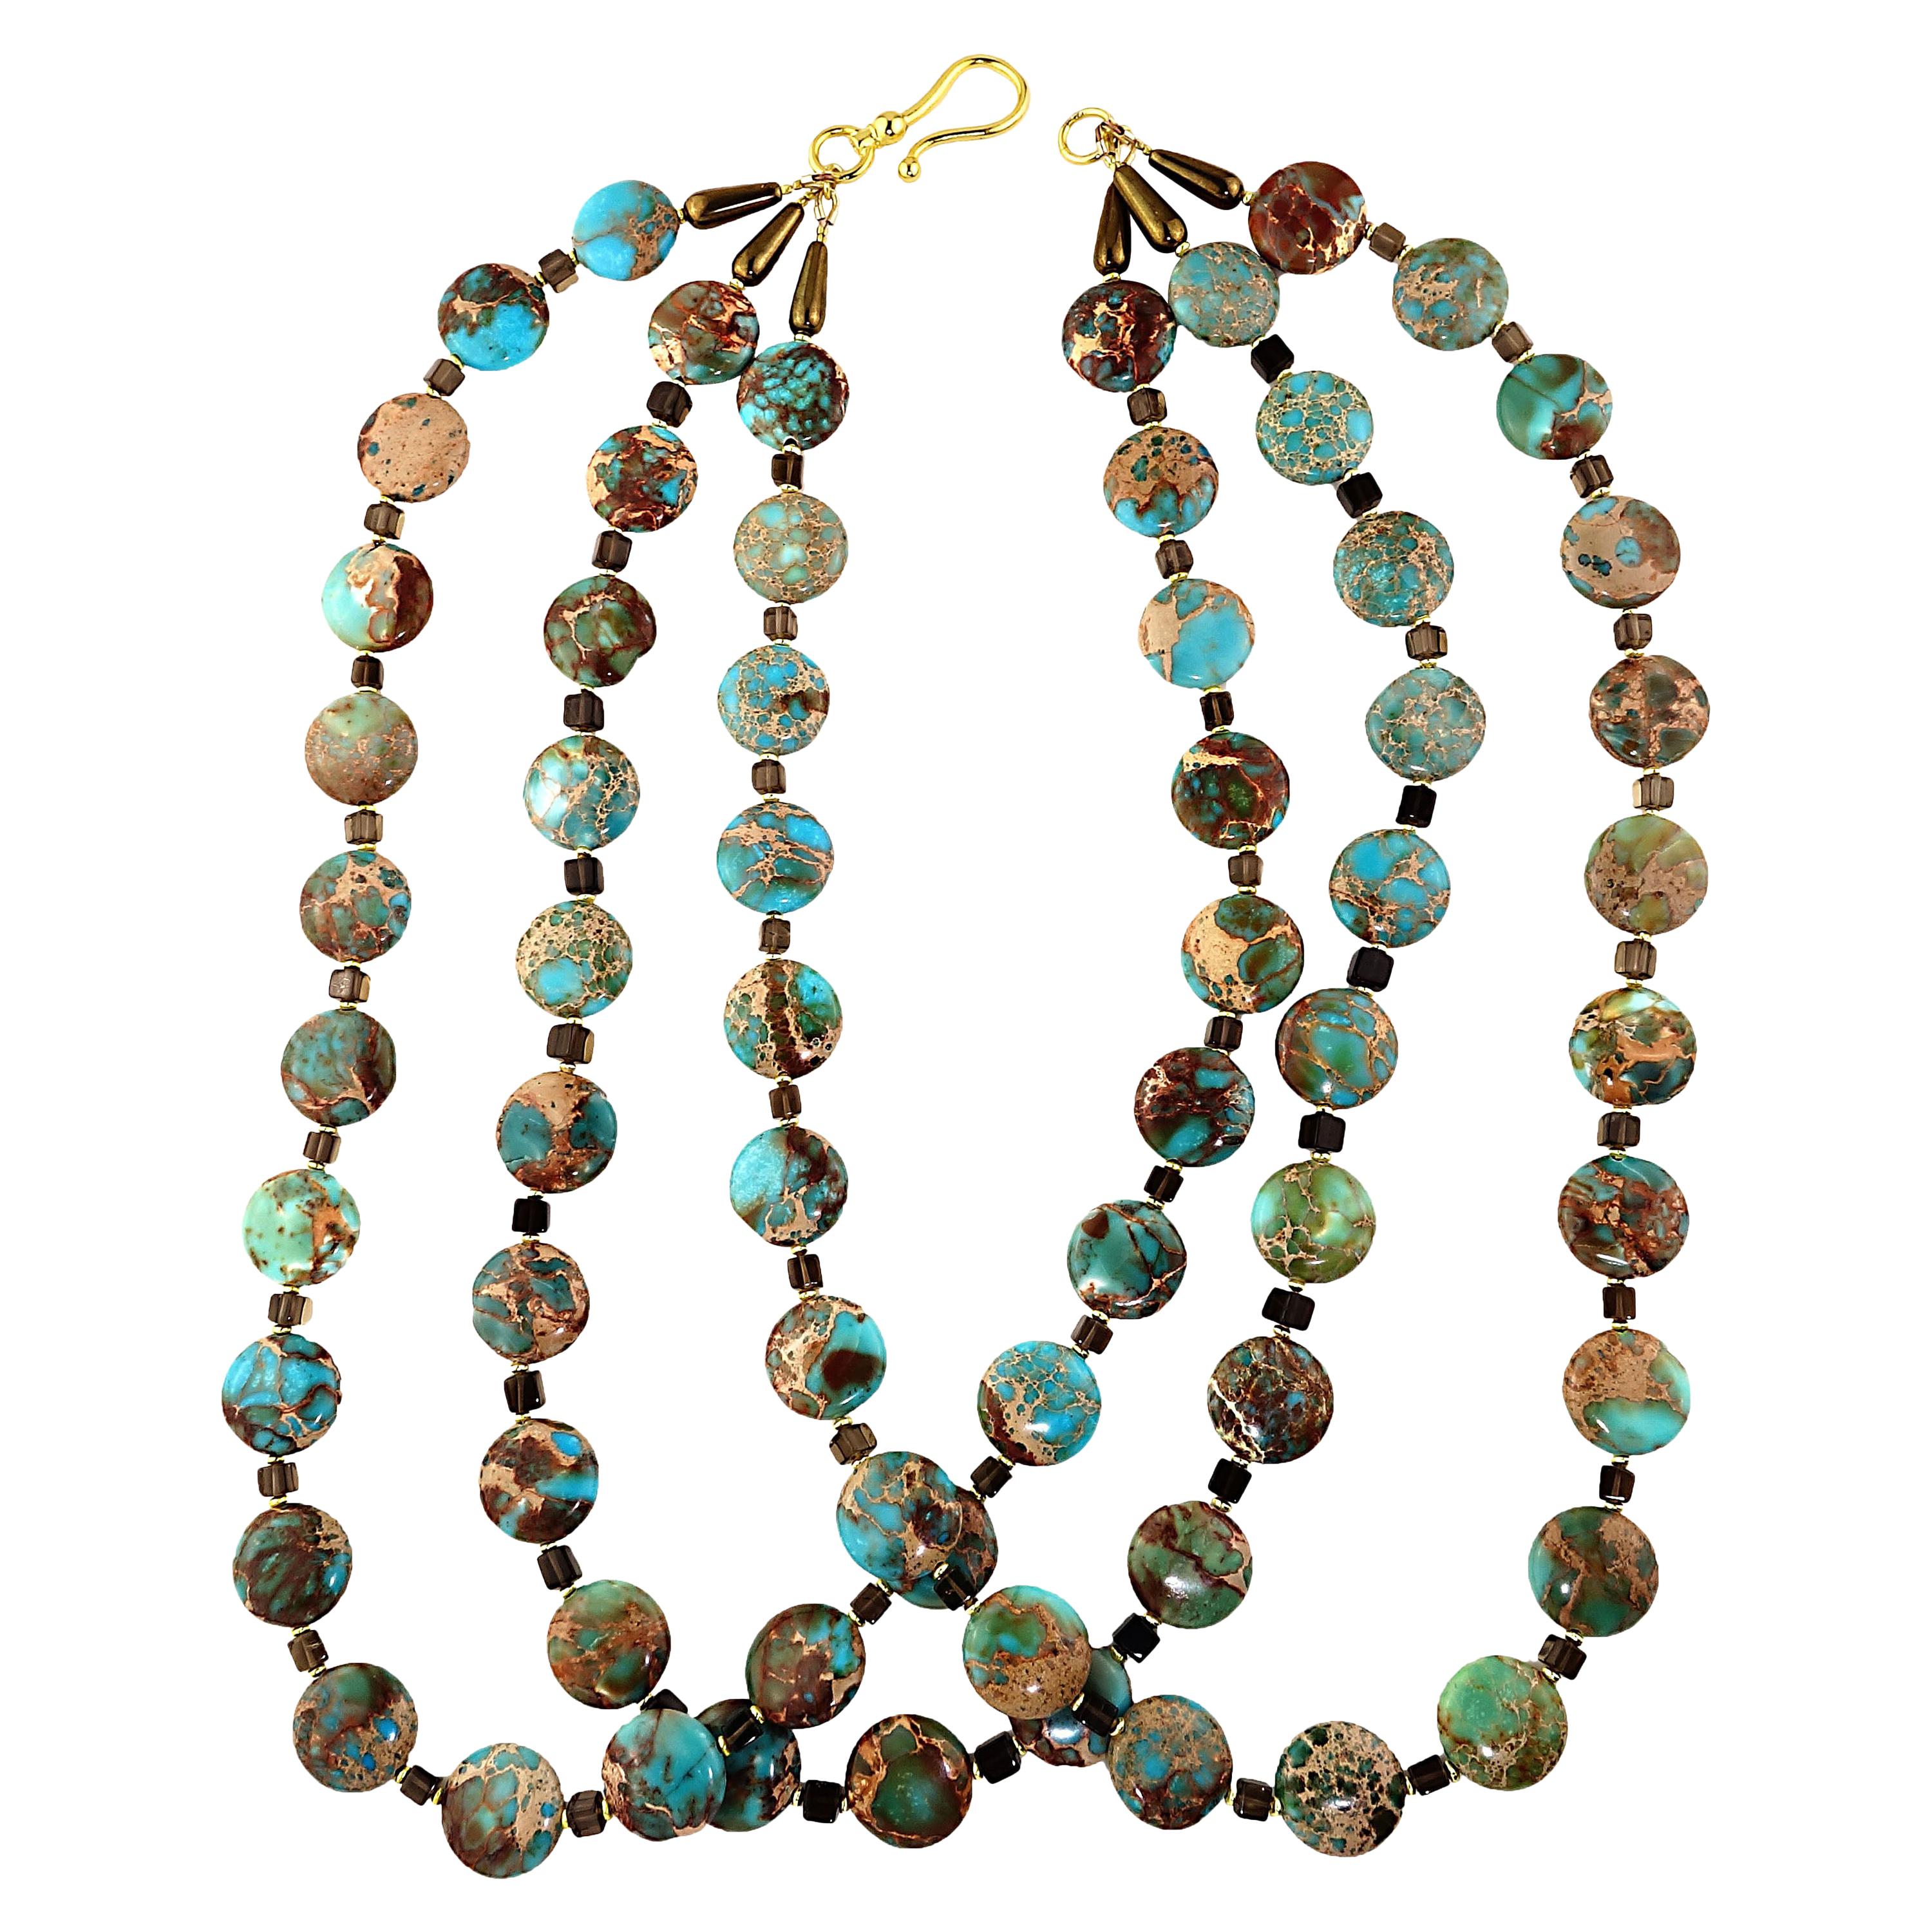 Unique necklace of three strand Desert Jasper and Smoky Quartz.  This one of a kind necklace features three stands 24-25 inches in length.  They are that fabulous mottled combination of turquoisey blue and brownish gold that is beautifully displayed